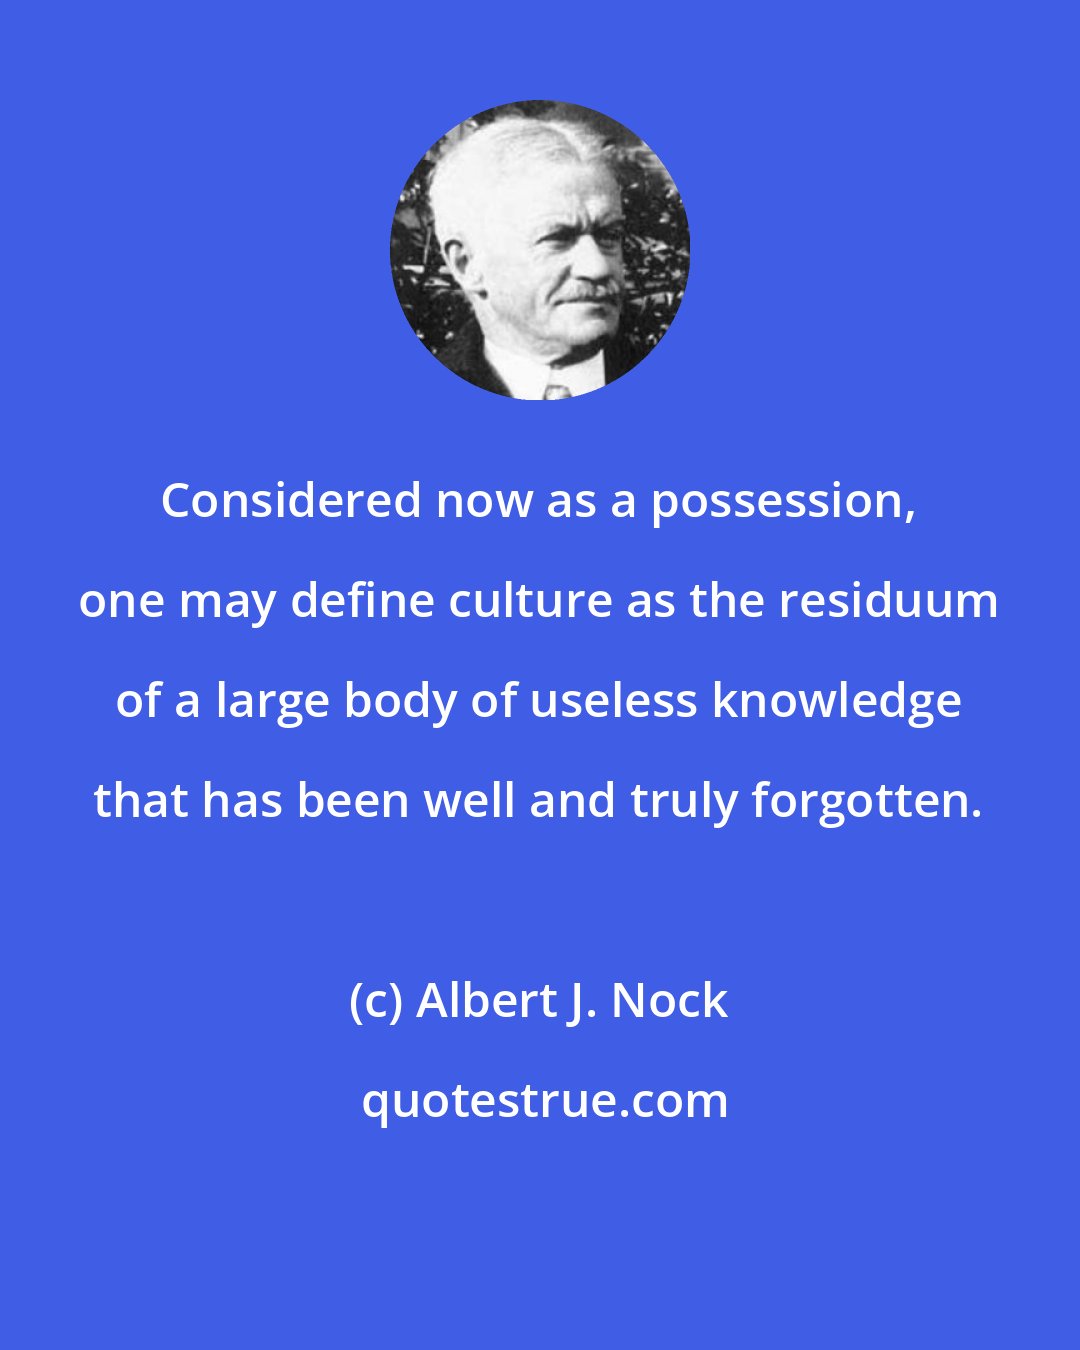 Albert J. Nock: Considered now as a possession, one may define culture as the residuum of a large body of useless knowledge that has been well and truly forgotten.